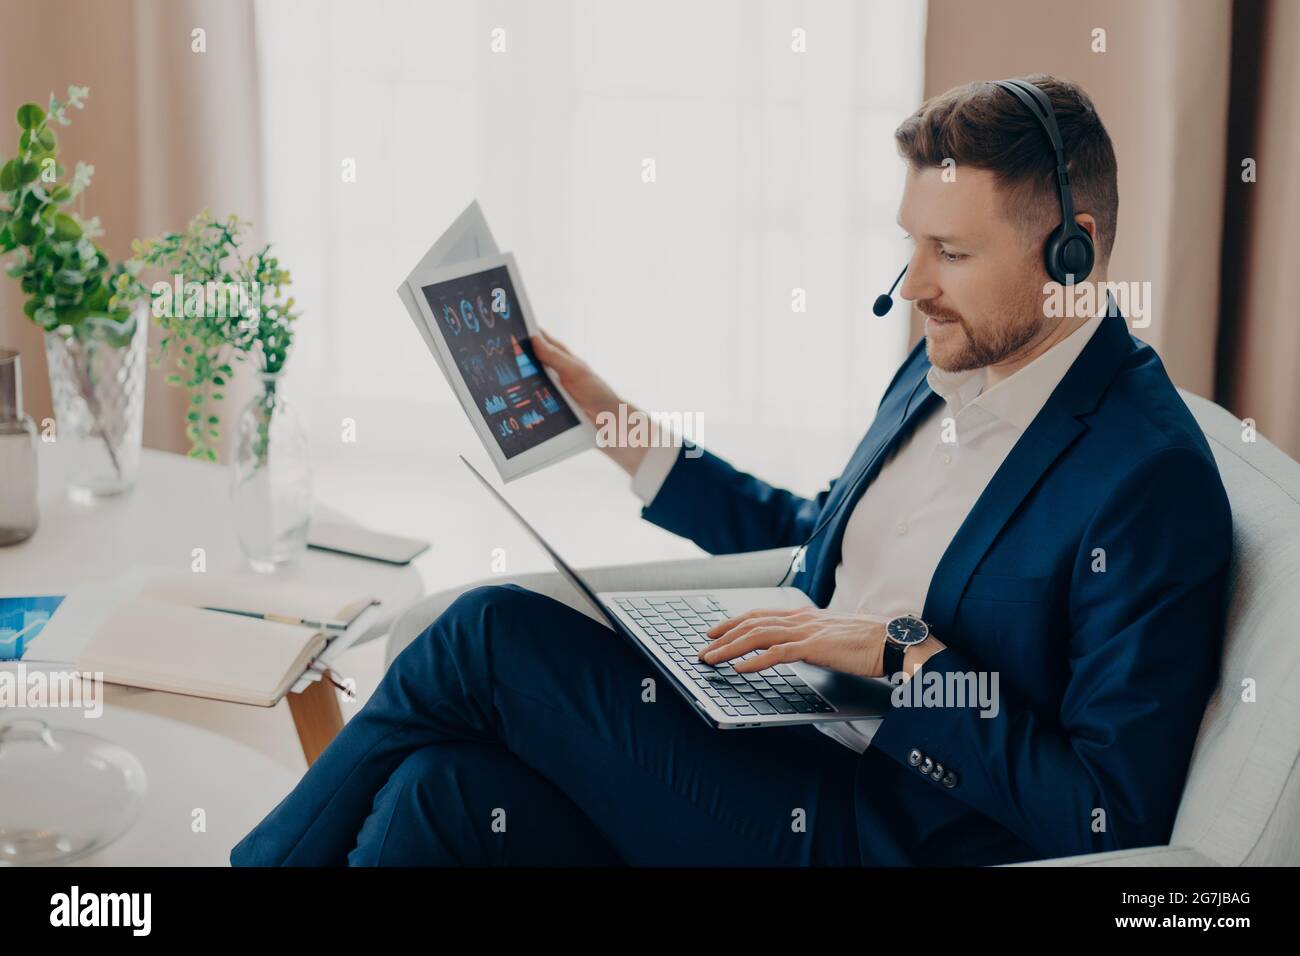 Male financial expert looks through papers with graphics dressed in formal clothes checks information on laptop computer wears headset poses against Stock Photo